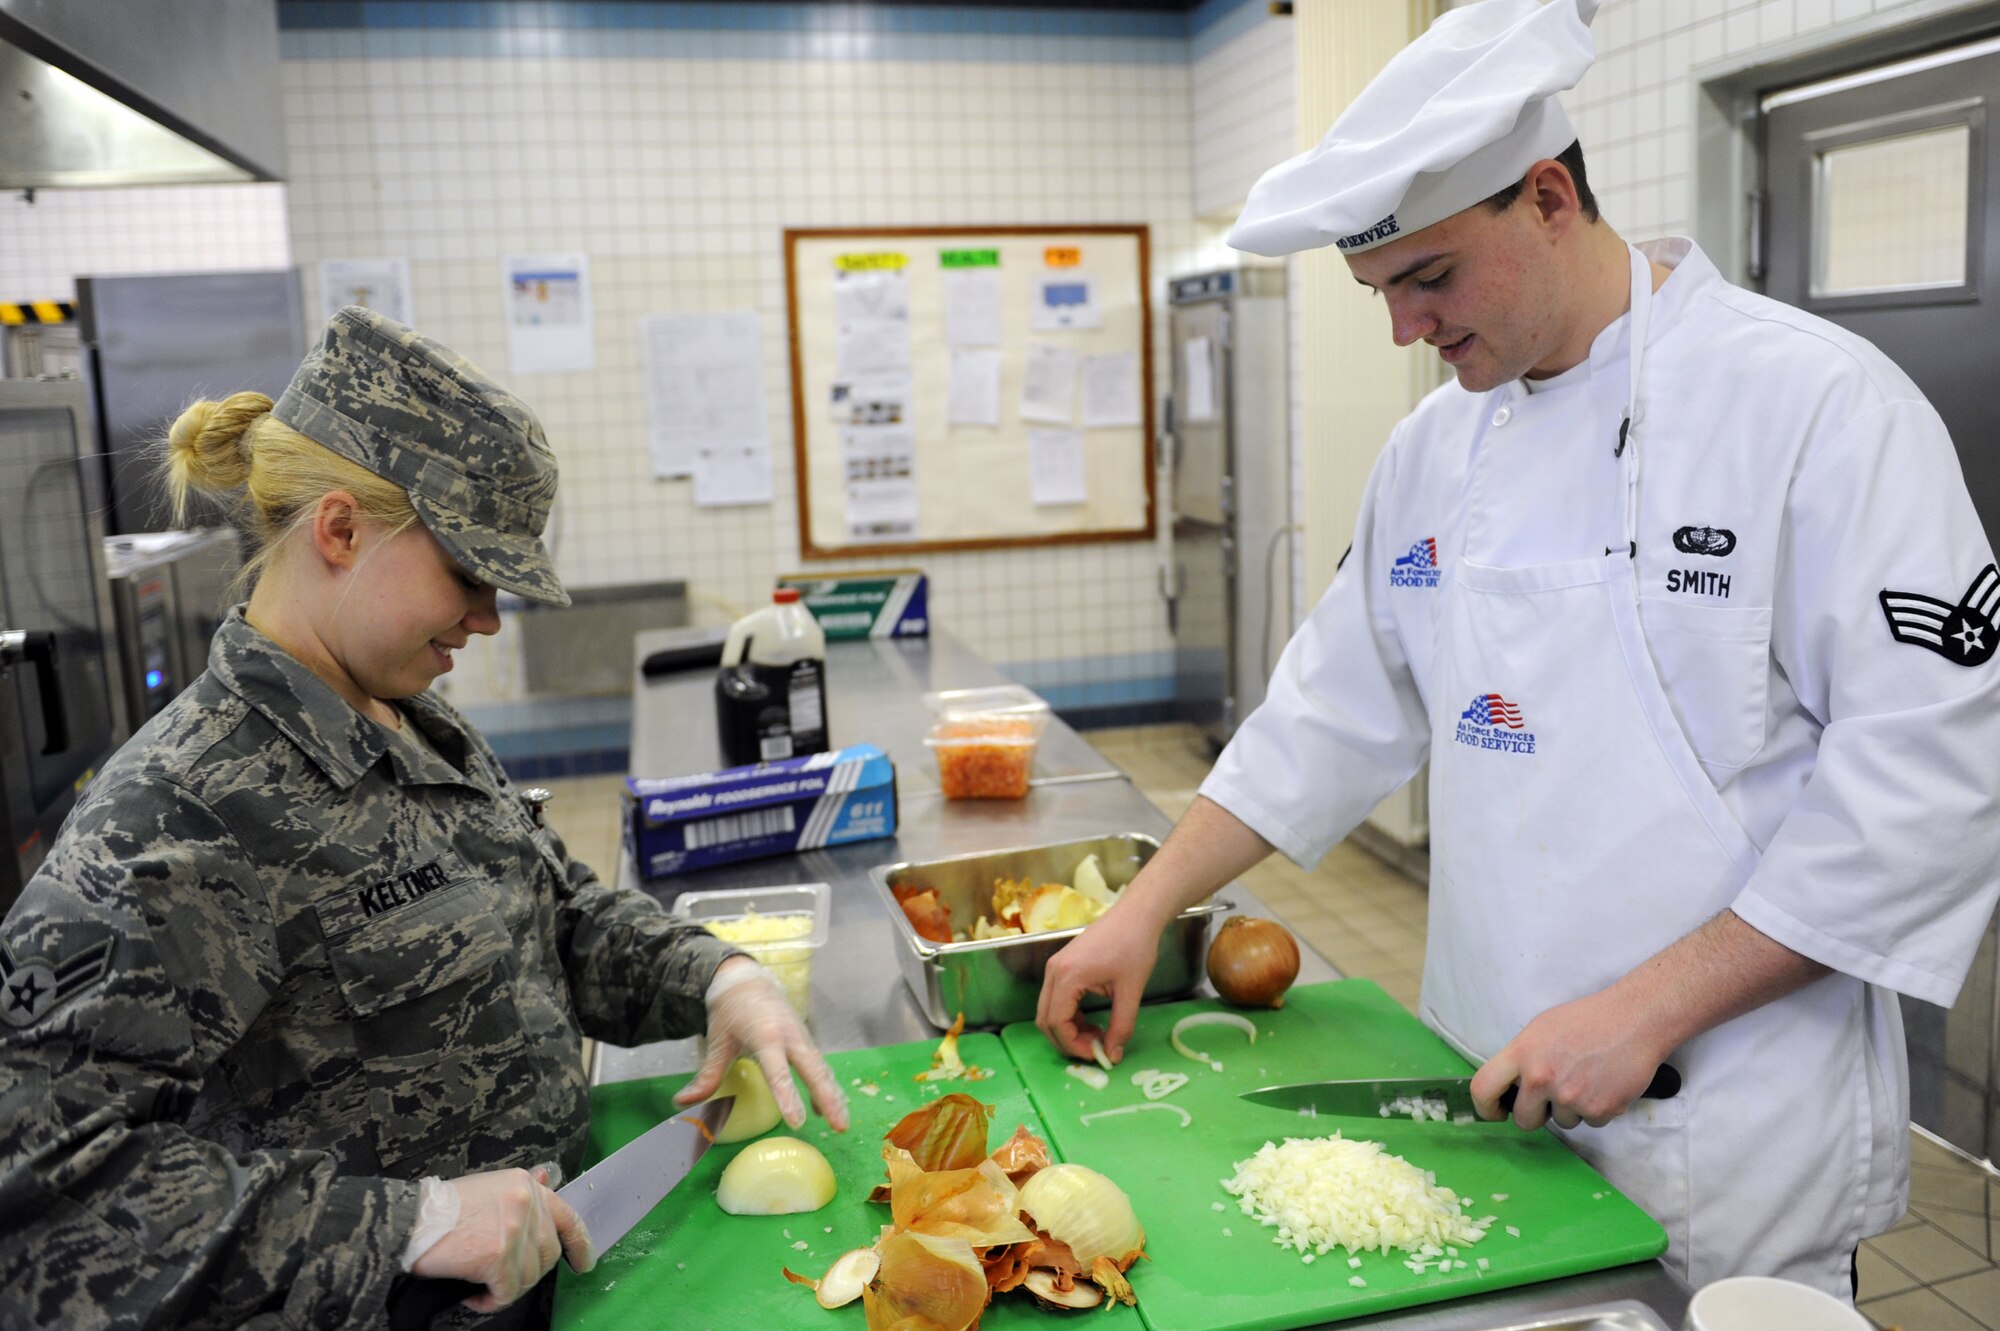 SPANGDAHLEM AIR BASE, Germany – Airman 1st Class Shilah Keltner and Senior Airman Patrick Smith, 52nd Force Support Squadron food service journeymen, prep onions for the lunch meal service at the Mosel Hall Dining Facility here March 13. The DFAC provides fresh meals to more than 4,270 enlisted service members on a daily basis to include breakfast, lunch, dinner and midnight meals. In addition, they provide service to all Department of Defense civilians, military service members and reserve officer training corps cadets with temporary duty orders. The DFAC also provides service to all family members and retirees on a case by case base, such as Thanksgiving, Christmas and Air Force birthdays. (U.S. Air Force photo by Senior Airman Christopher Toon/Released)